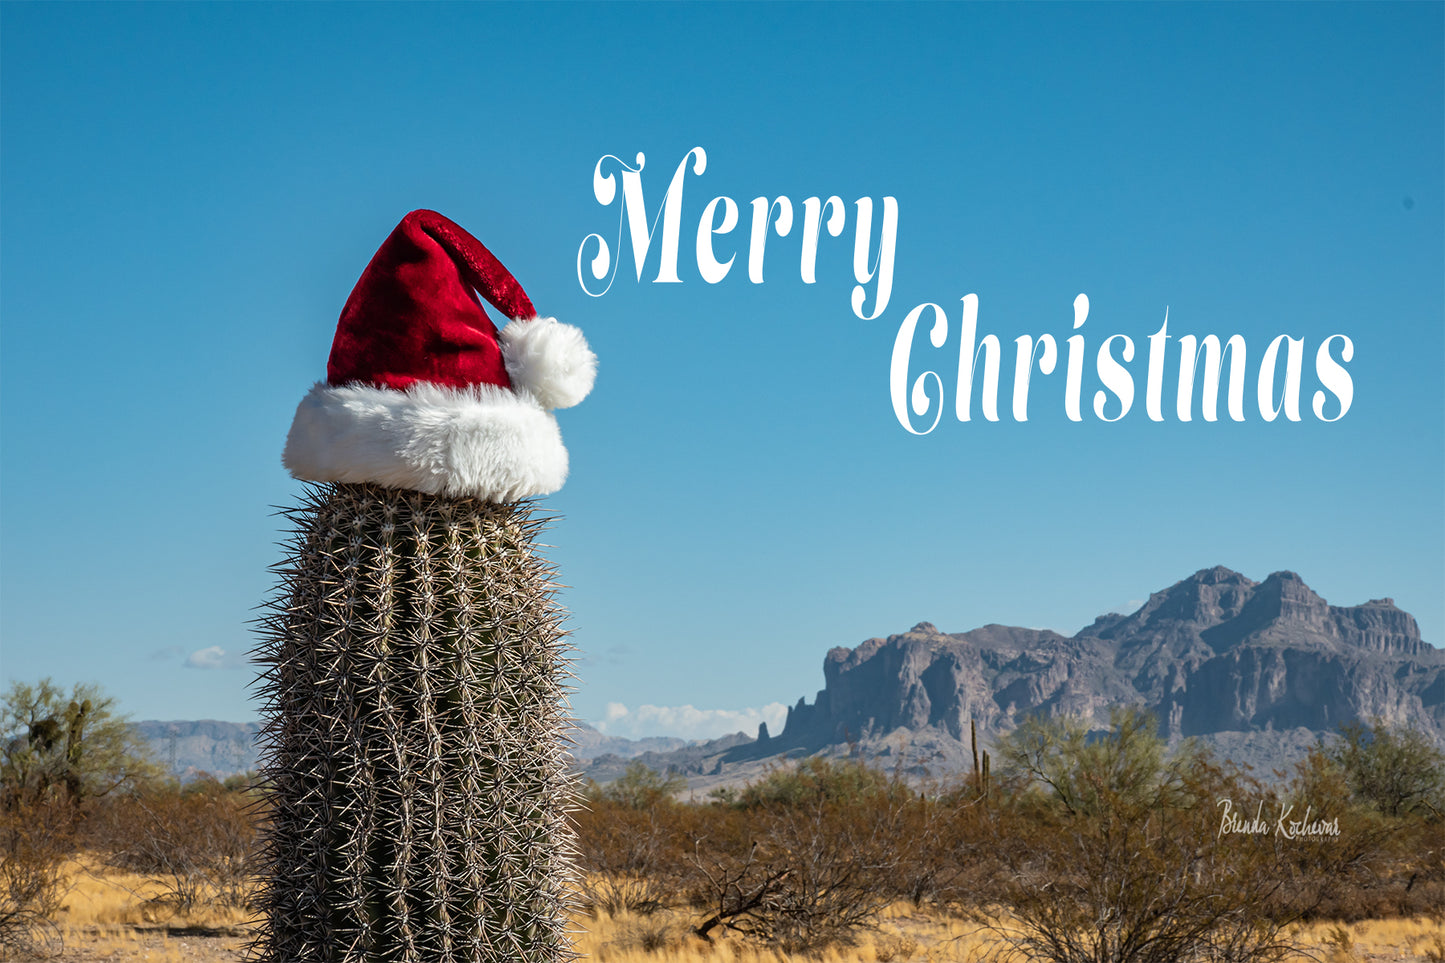 Merry Christmas in the Desert Greeting Card